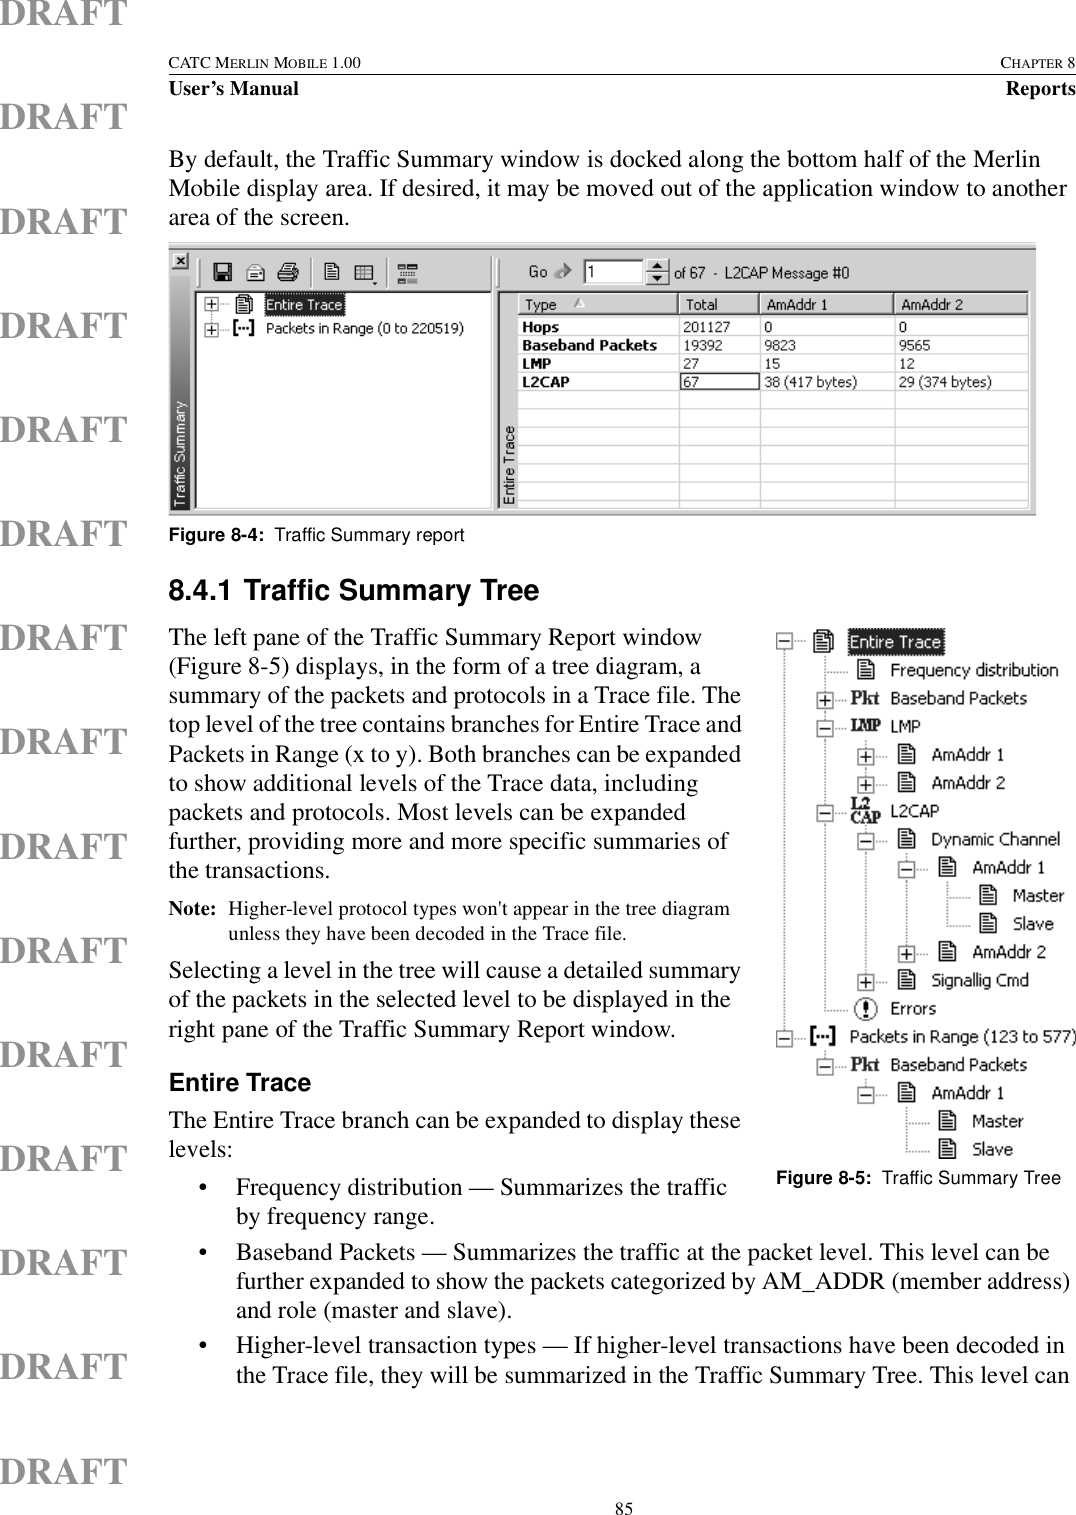  85CATC MERLIN MOBILE 1.00 CHAPTER 8User’s Manual ReportsDRAFTDRAFTDRAFTDRAFTDRAFTDRAFTDRAFTDRAFTDRAFTDRAFTDRAFTDRAFTDRAFTDRAFTDRAFTBy default, the Traffic Summary window is docked along the bottom half of the Merlin Mobile display area. If desired, it may be moved out of the application window to another area of the screen.8.4.1 Traffic Summary TreeThe left pane of the Traffic Summary Report window (Figure 8-5) displays, in the form of a tree diagram, a summary of the packets and protocols in a Trace file. The top level of the tree contains branches for Entire Trace and Packets in Range (x to y). Both branches can be expanded to show additional levels of the Trace data, including packets and protocols. Most levels can be expanded further, providing more and more specific summaries of the transactions. Note: Higher-level protocol types won&apos;t appear in the tree diagram unless they have been decoded in the Trace file.Selecting a level in the tree will cause a detailed summary of the packets in the selected level to be displayed in the right pane of the Traffic Summary Report window. Entire TraceThe Entire Trace branch can be expanded to display these levels:• Frequency distribution — Summarizes the traffic by frequency range.• Baseband Packets — Summarizes the traffic at the packet level. This level can be further expanded to show the packets categorized by AM_ADDR (member address) and role (master and slave).• Higher-level transaction types — If higher-level transactions have been decoded in the Trace file, they will be summarized in the Traffic Summary Tree. This level can Figure 8-4:  Traffic Summary reportFigure 8-5:  Traffic Summary Tree